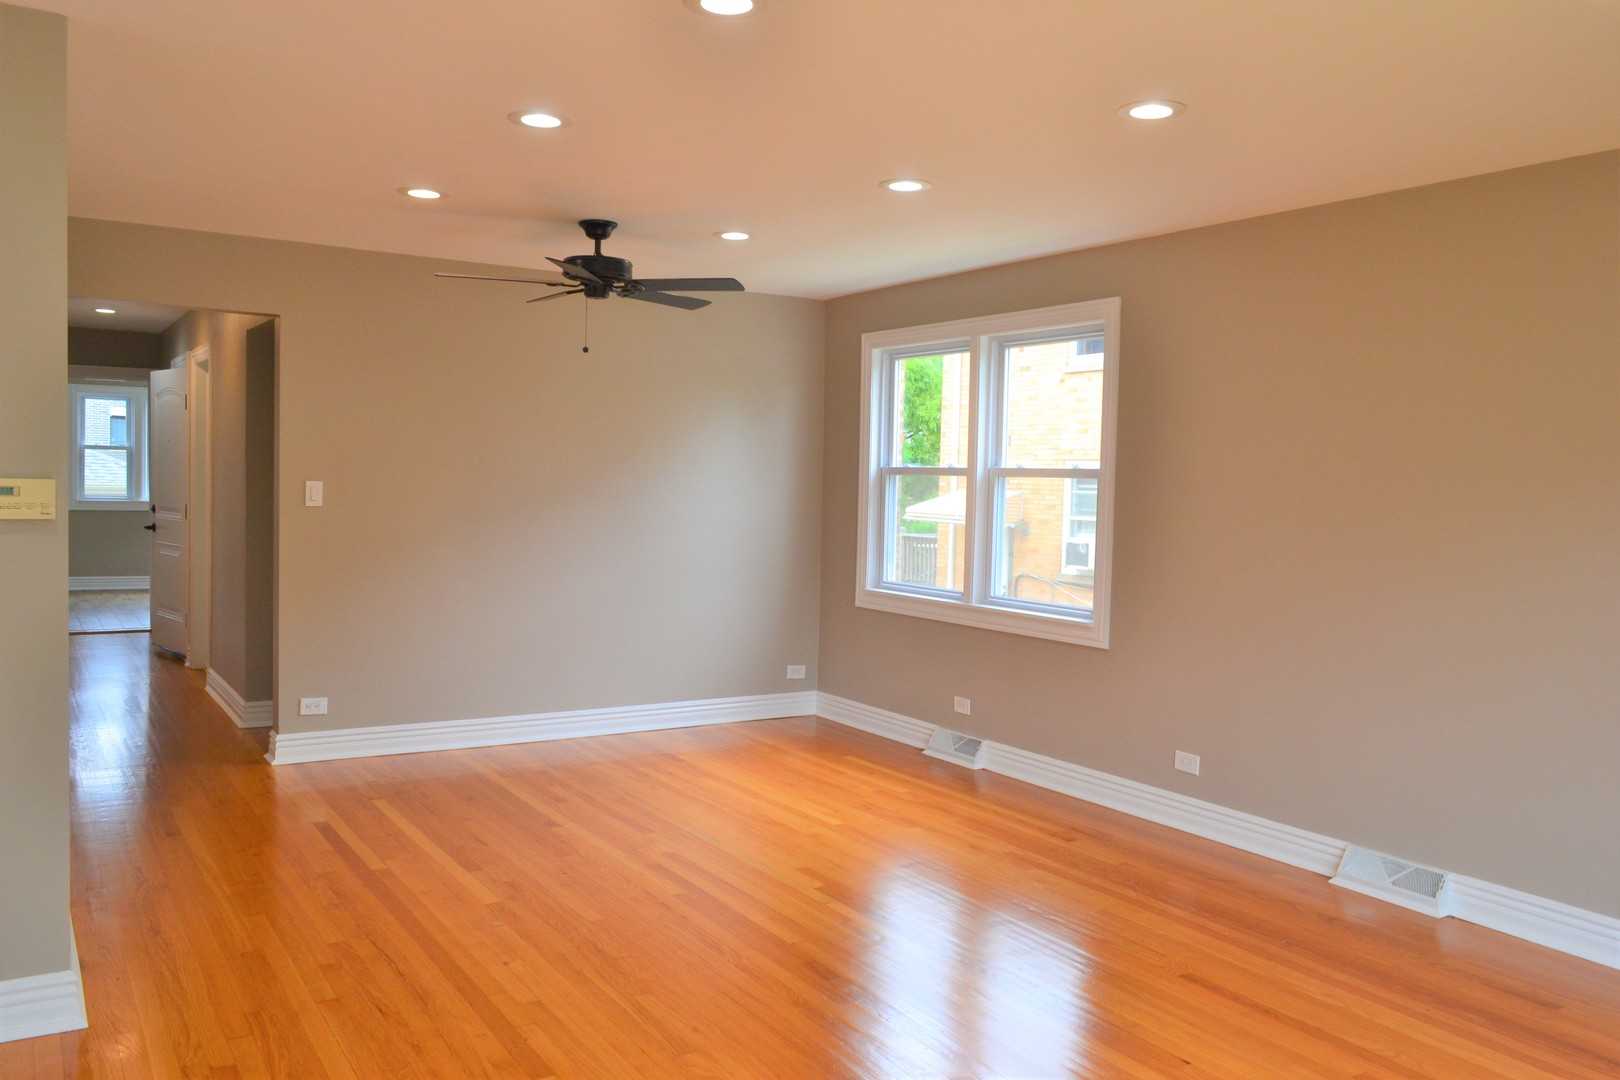 an empty room with wooden floor ceiling fan and windows